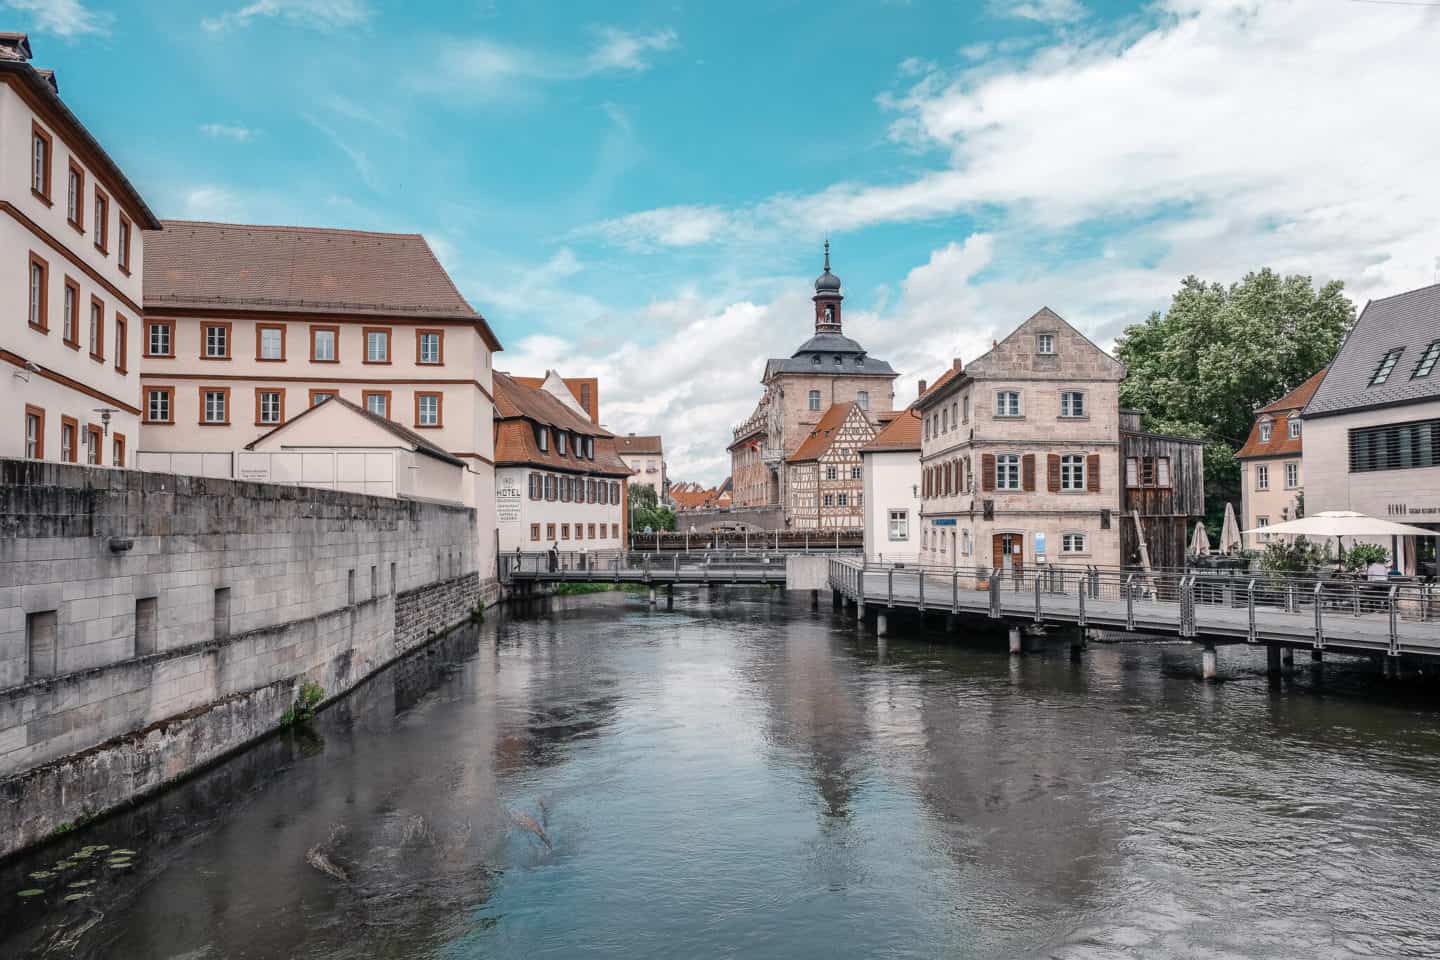 A serene river scene in Bamberg, with a view of historical buildings reflecting the city's architectural heritage. The tranquil waters of the river are bordered by stone walls, and a pedestrian bridge connects both sides, leading to charming buildings with classic Franconian half-timbered designs. The cloudy sky adds a peaceful overture to this picturesque setting.